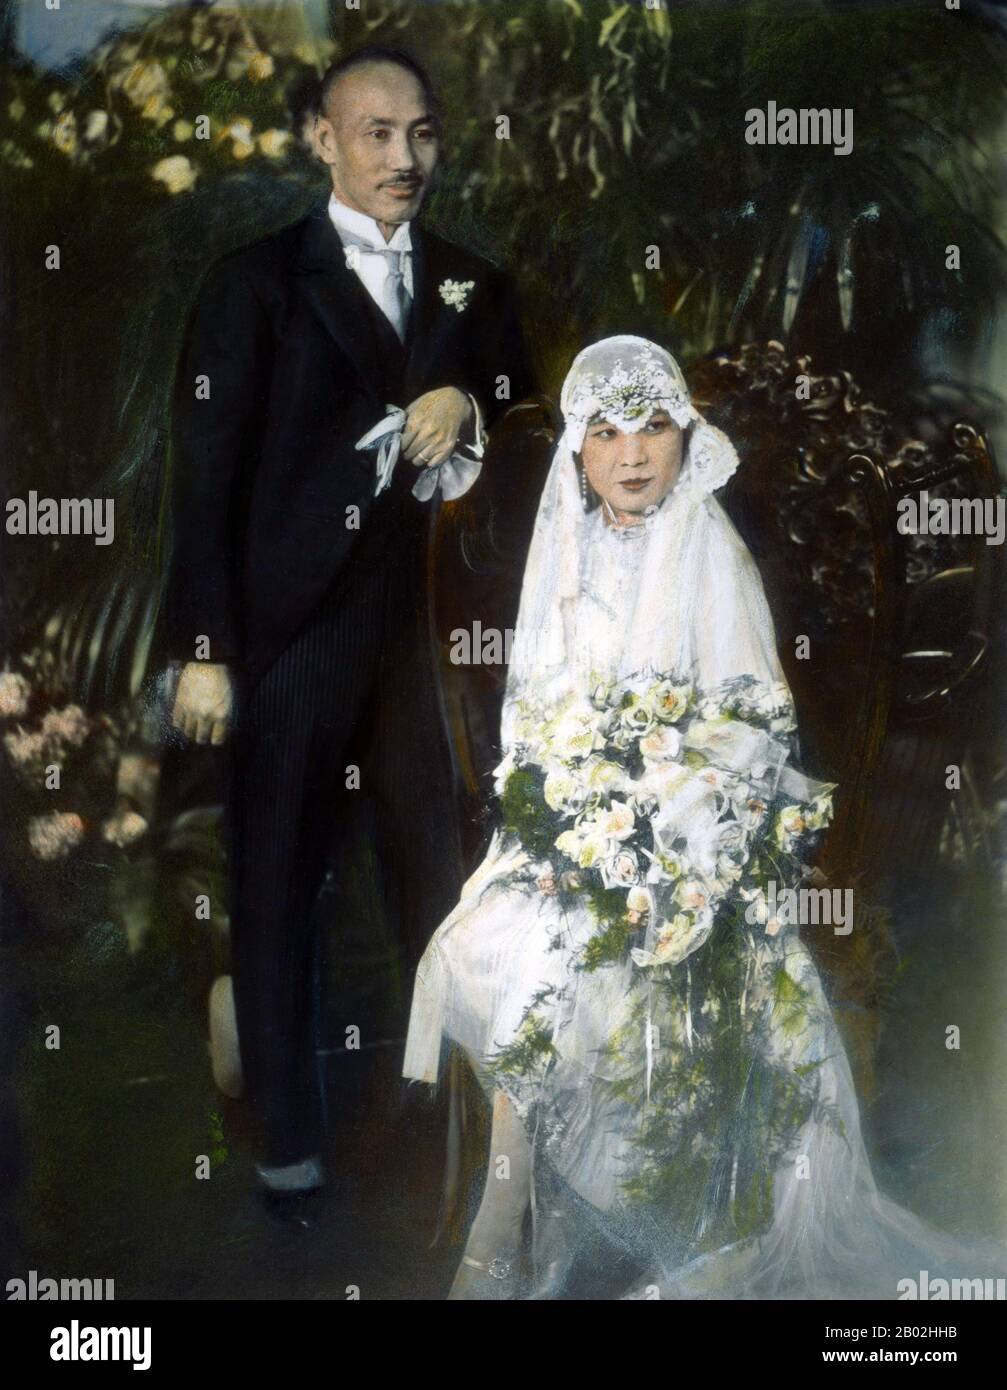 Marriage of Chiang Kai Shek and Soong May Ling, Shanghai, December 1 1927. Soong May-ling or Mei-ling, also known as Madame Chiang Kai-shek (Song Meiling, 1898-2003), First Lady of the Republic of China (ROC) and wife of President Chiang Kai-shek.  She was a politician and painter. The youngest and the last surviving of the three Soong sisters, she played a prominent role in the politics of the Republic of China and was the sister in law of Song Qingling, wife of President Sun Yat-sen, the founder of the Chinese Republic (1912). Stock Photo